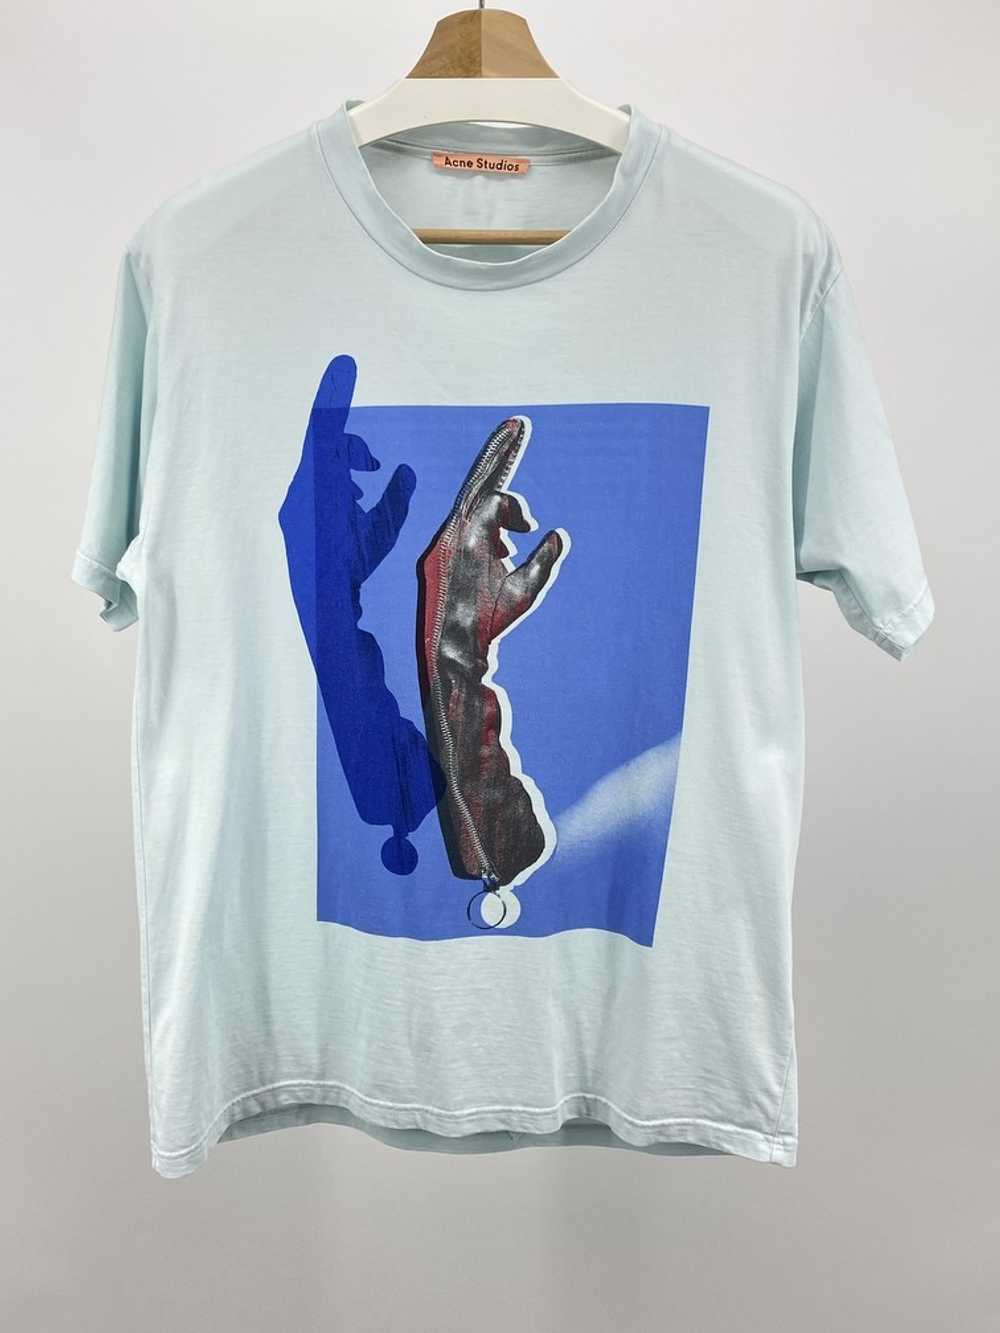 Acne Studios Special Edition Middle Finger - image 1